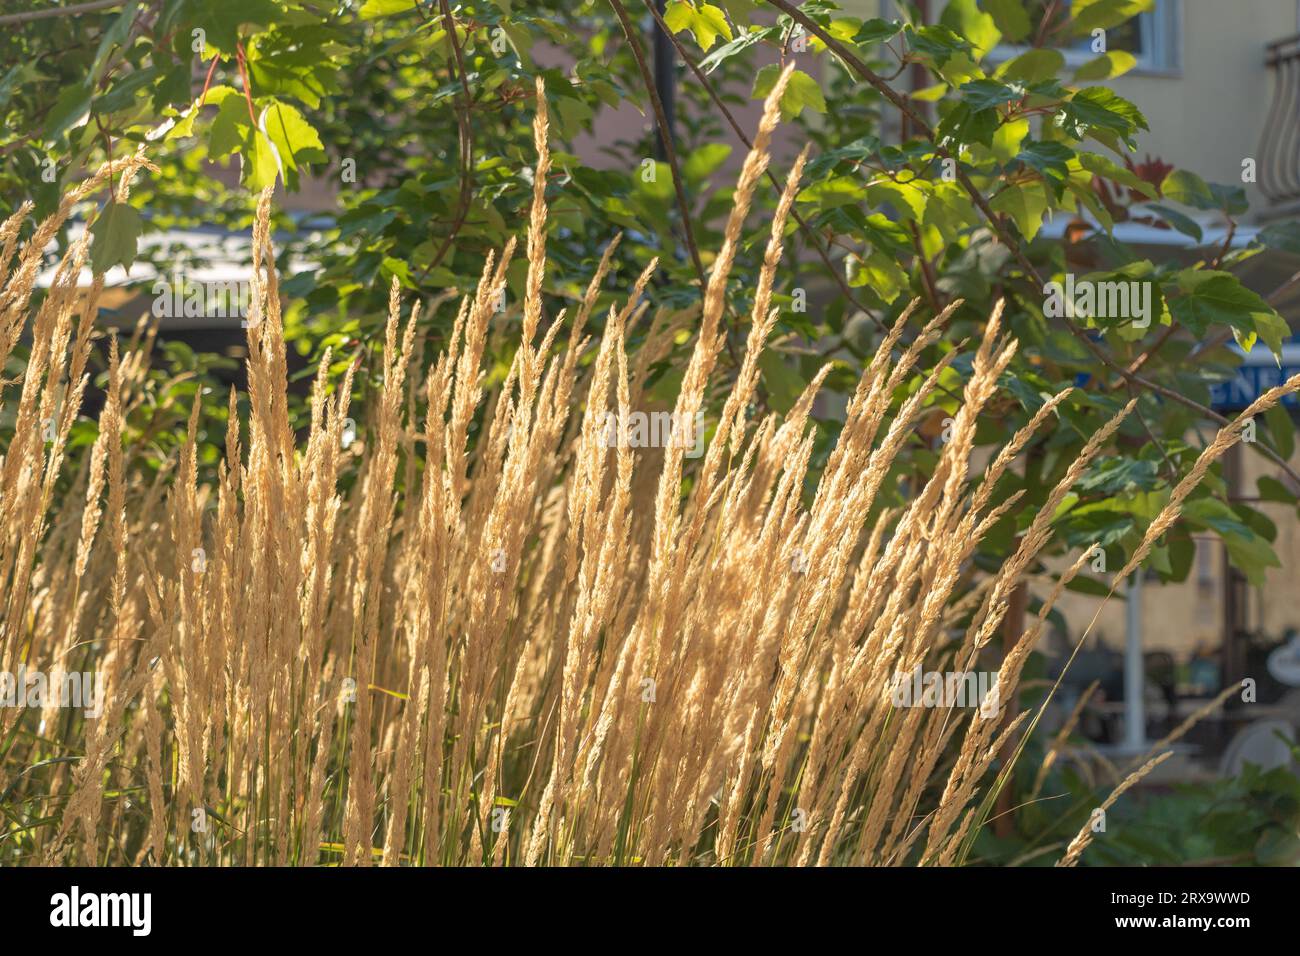 A tall grass plant Calamagrostis acutiflora in front of a building. Stock Photo